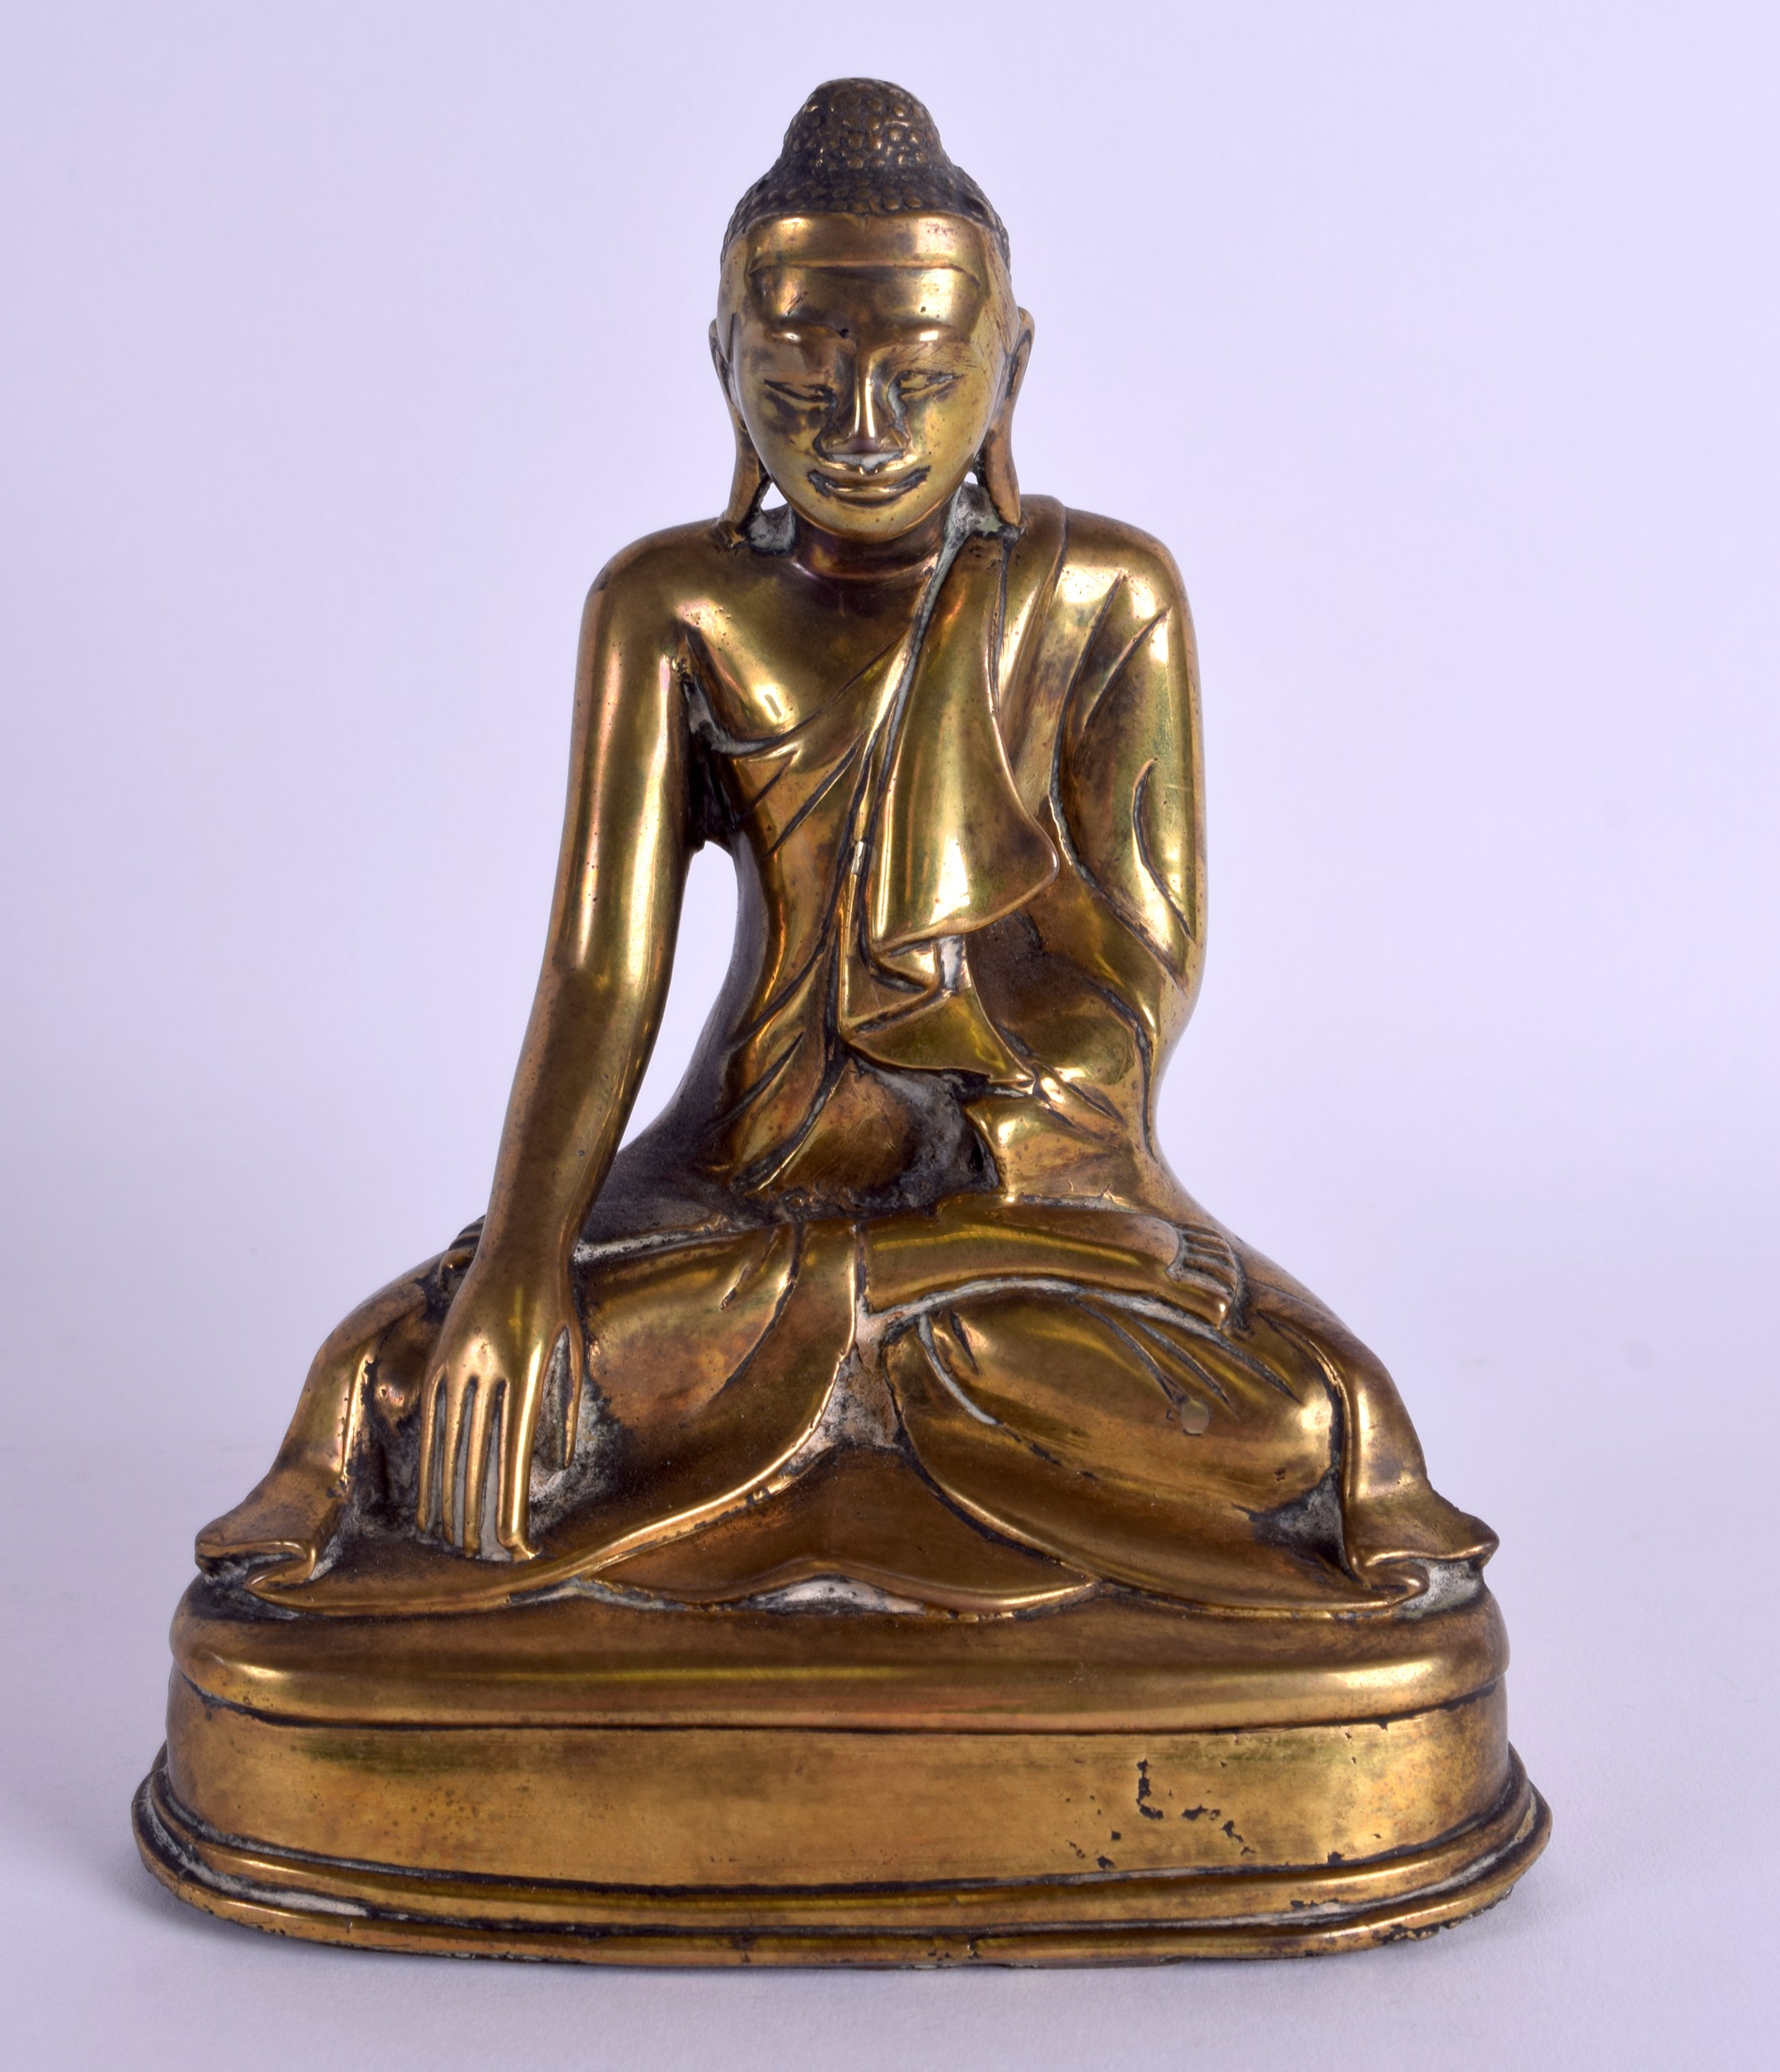 A 17TH CENTURY TIBETAN CHINESE ASIAN BRONZE FIGURE OF A BUDDHA modelled in robes upon a triangular